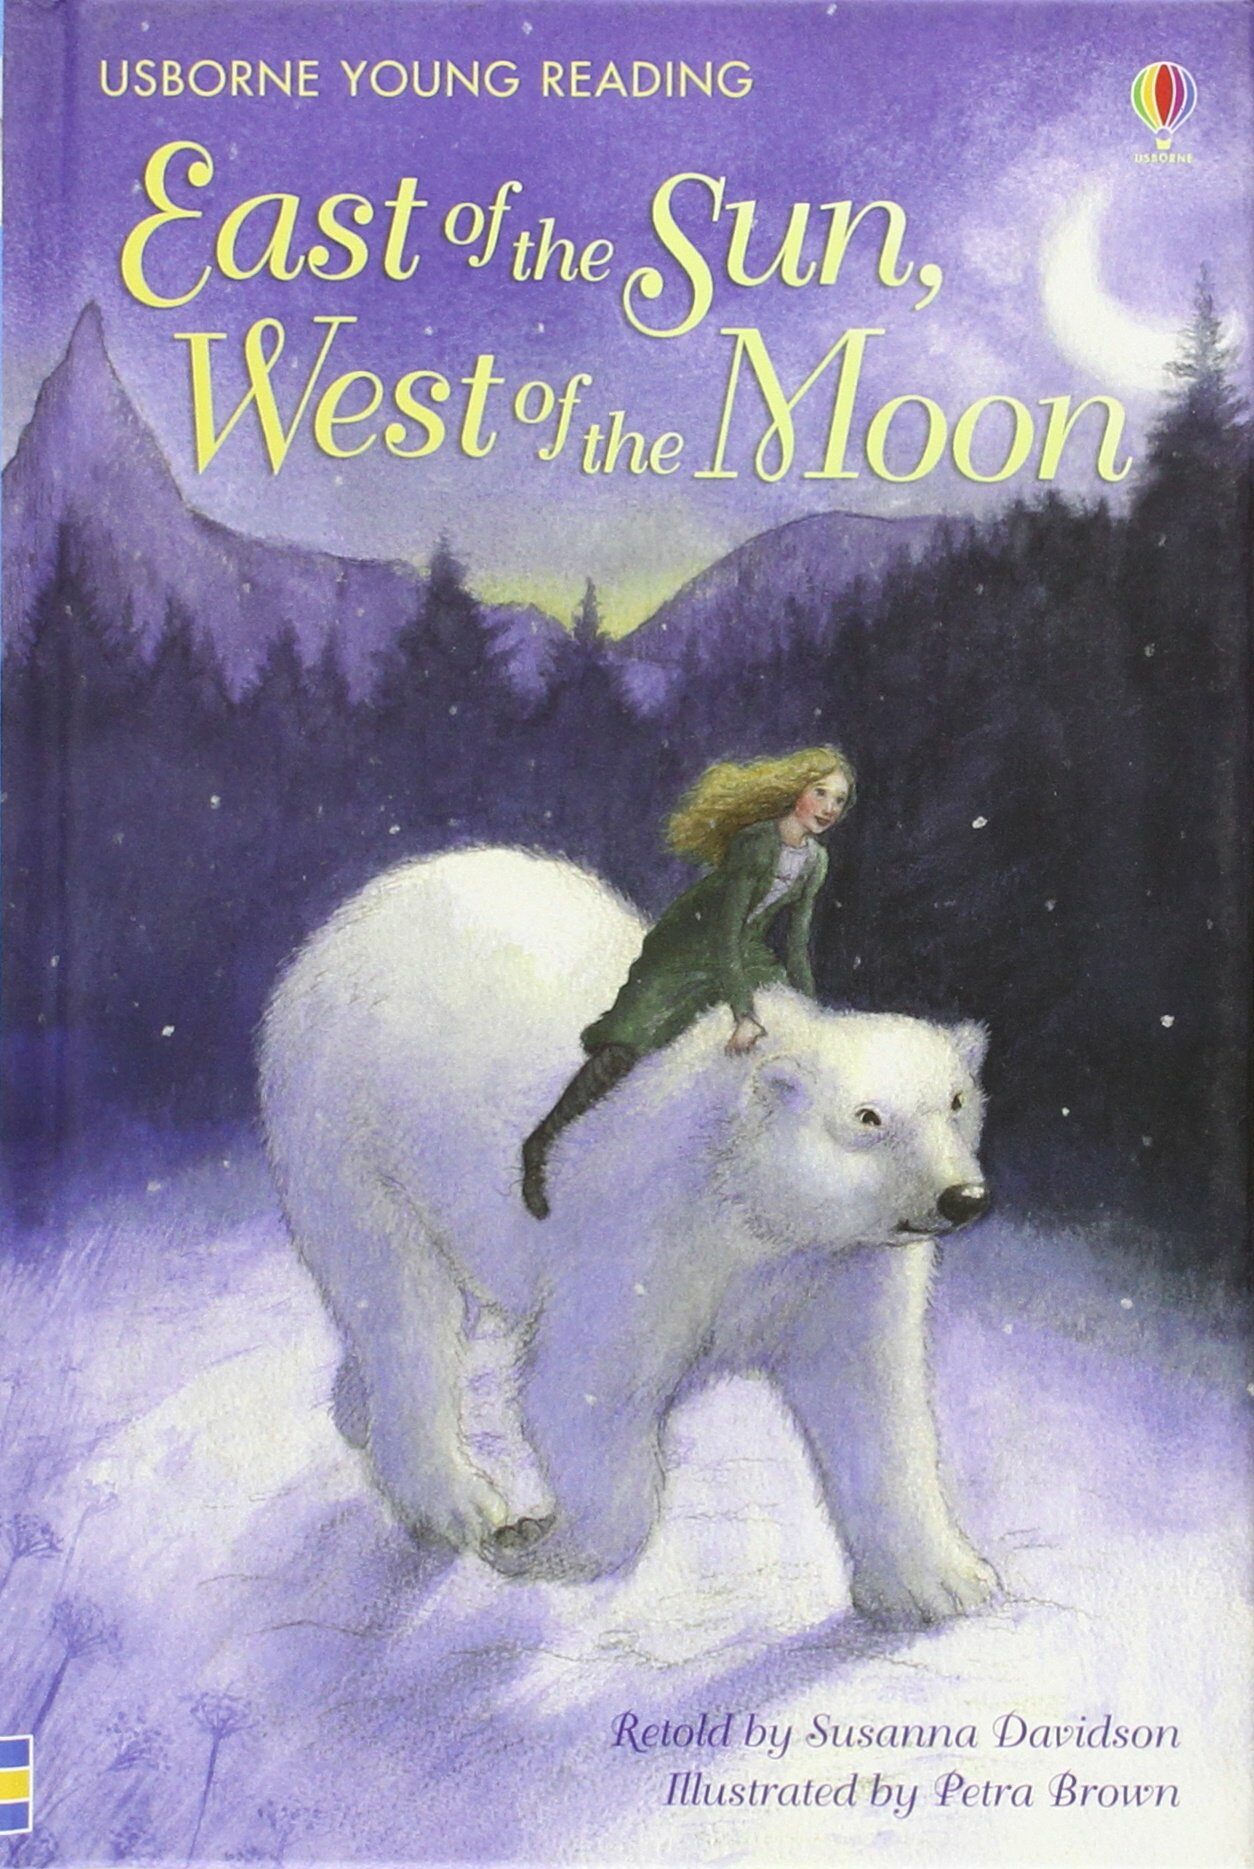 Usborne Young Reading 2-29 : East of the Sun, West of the Moon